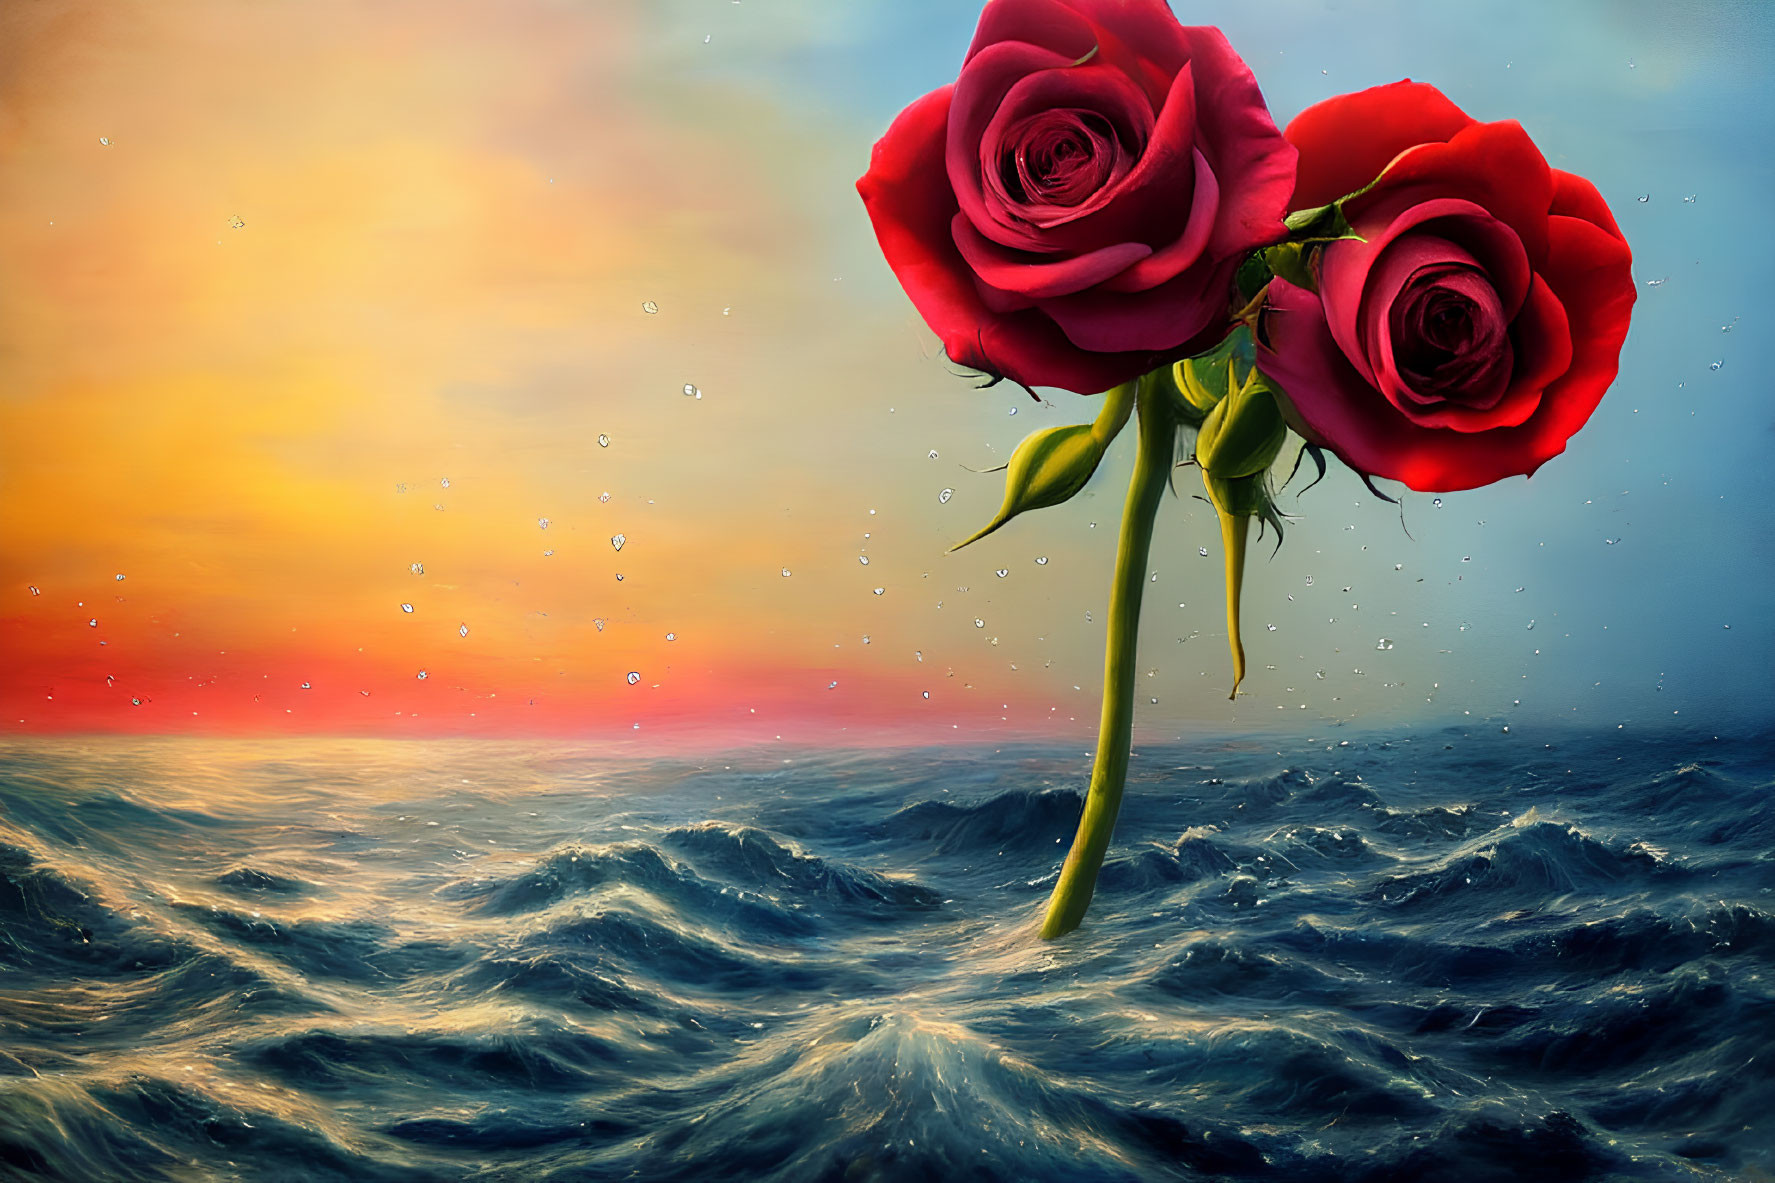 Vibrant red roses above stormy sea with colorful sunset sky